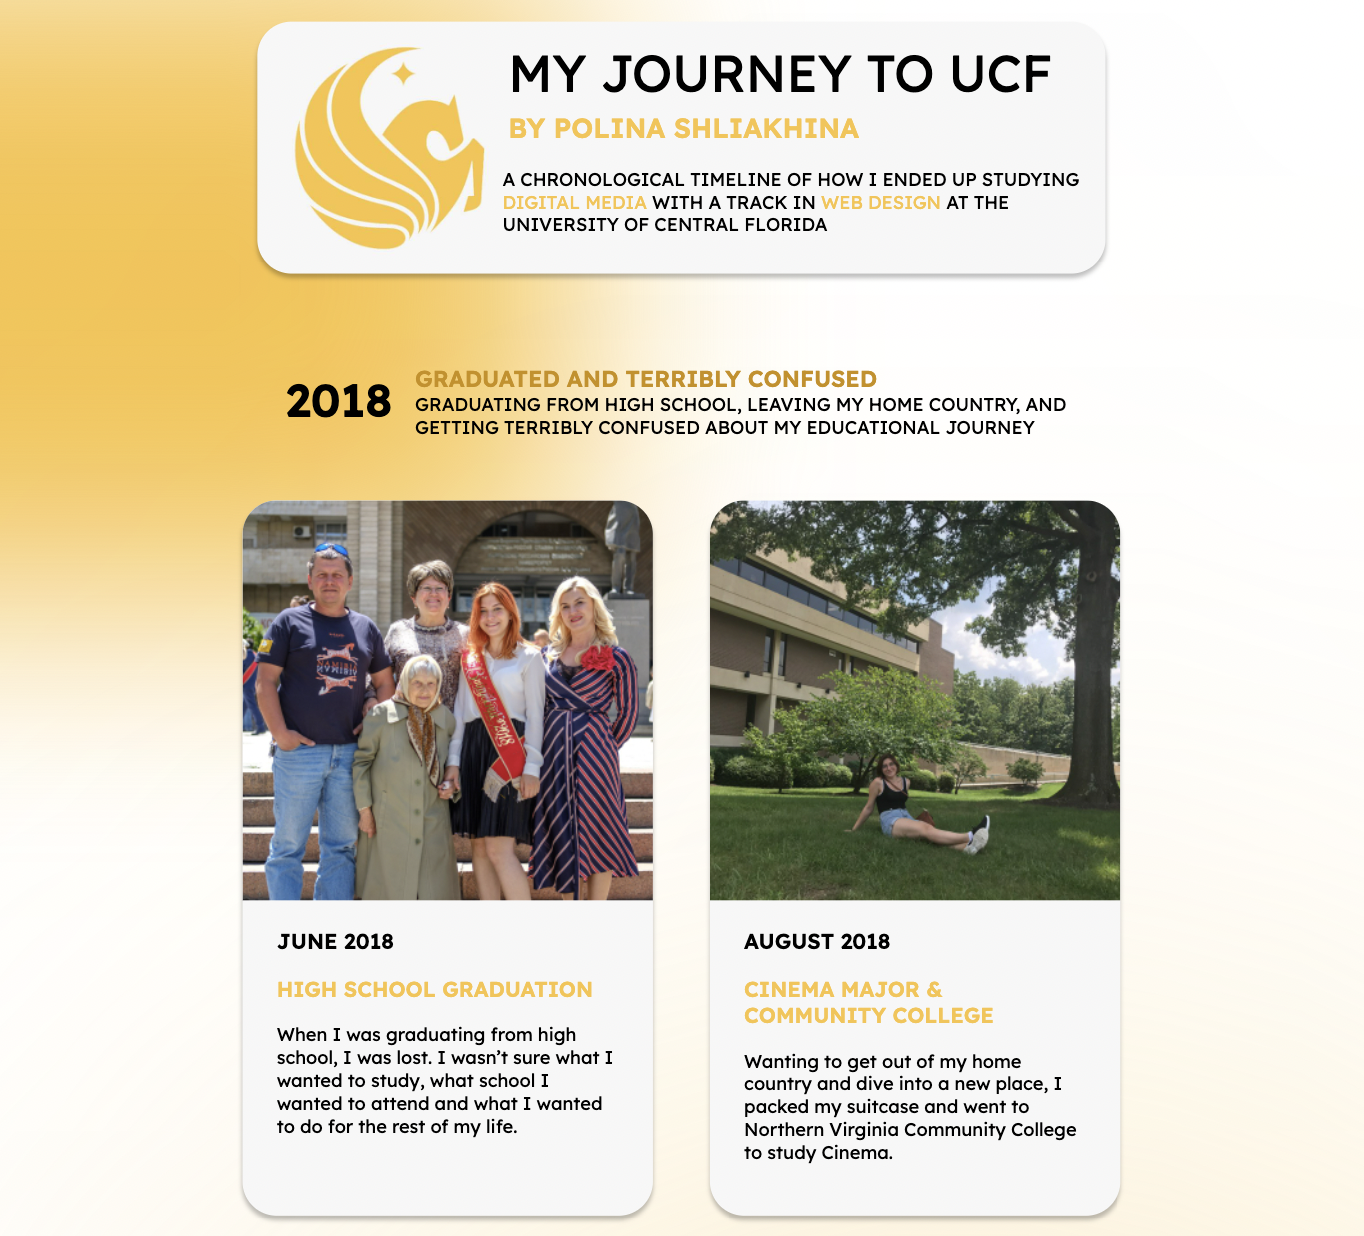 My Journey to UCF project